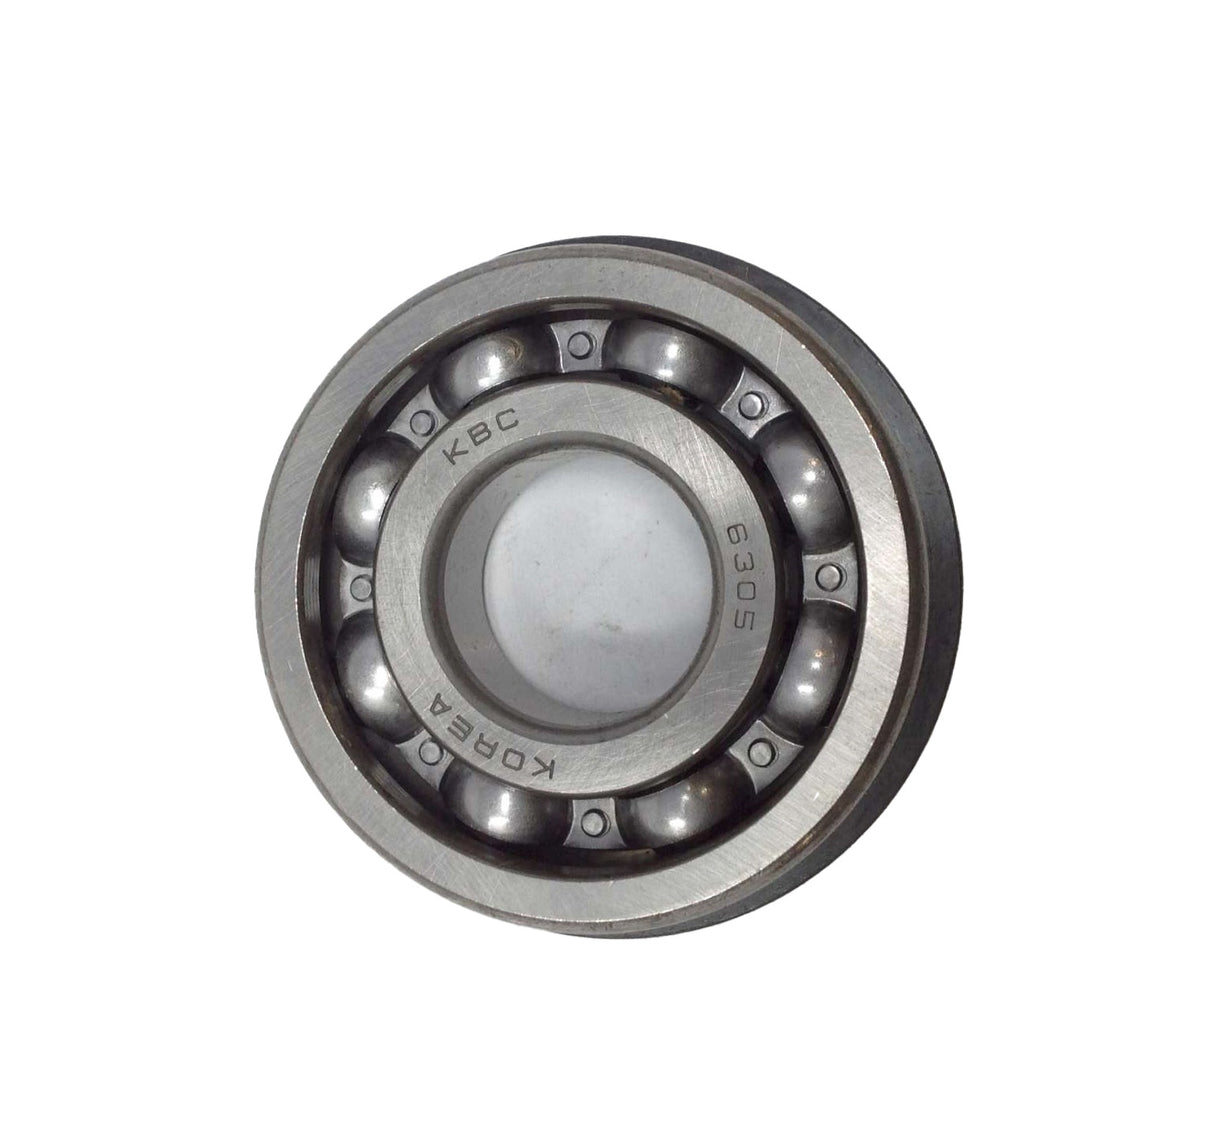 GENERAL ELECTRIC TRANSPORTATION ­-­ 8864950P26 ­-­ BALL BEARING - DEEP GROOVE RADIAL 62mm OD